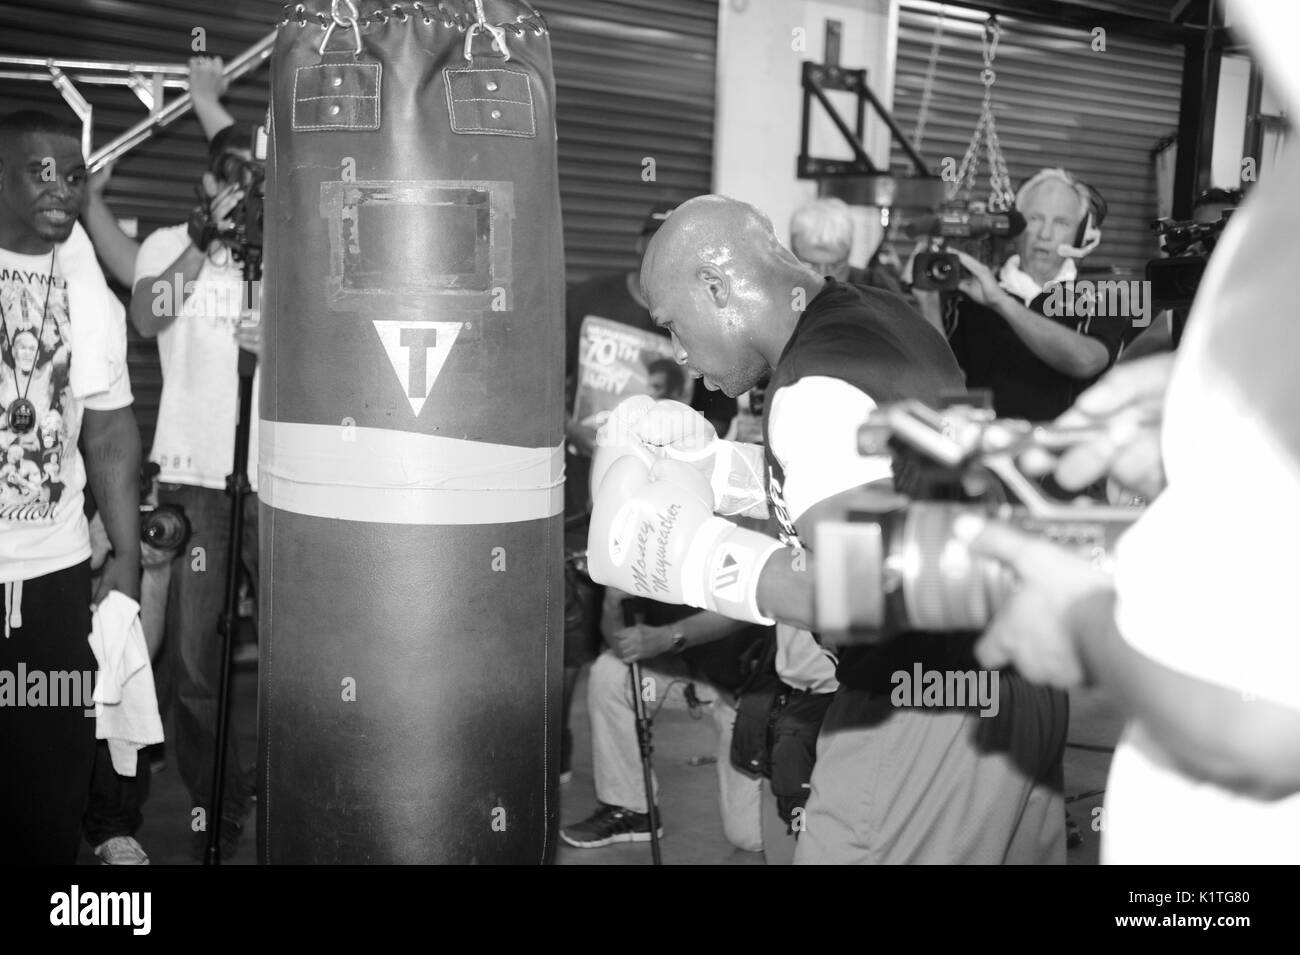 Boxer Floyd Mayweather Jr. Trains front media Mayweather Boxing Gym avril 24,2012 Las Vegas, Nevada. Banque D'Images